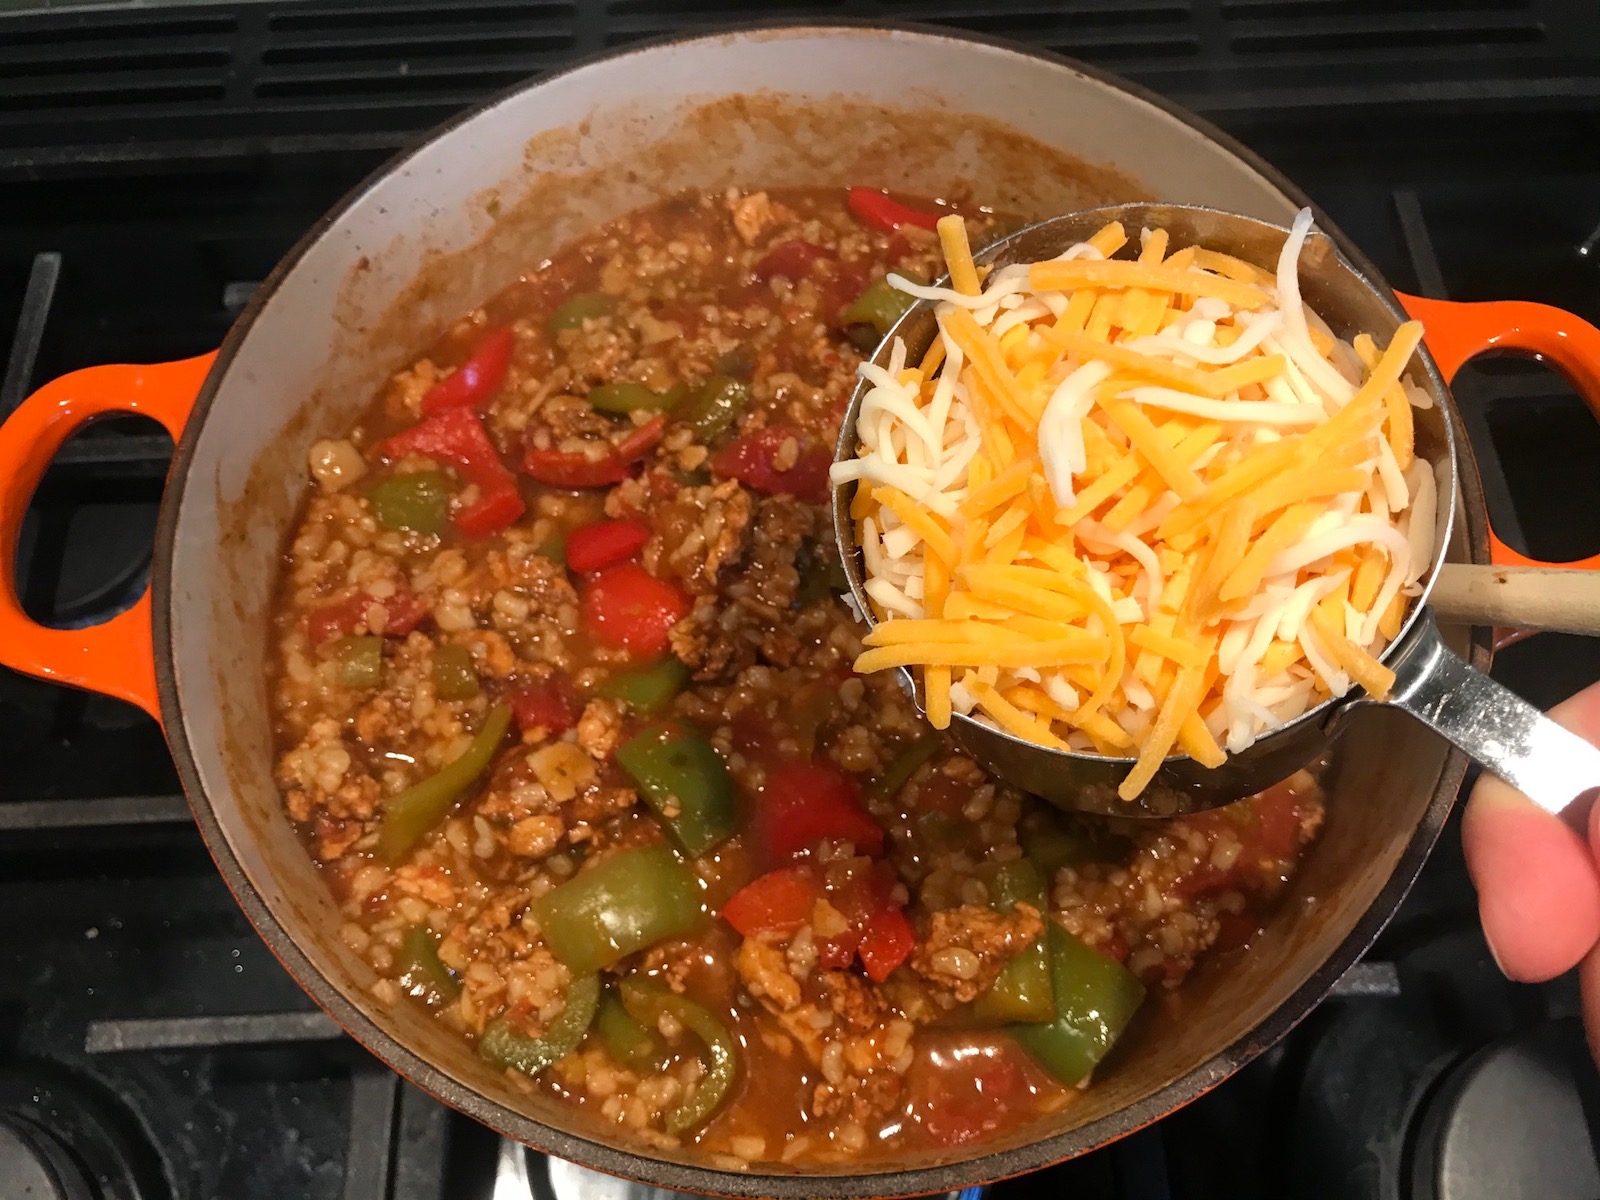 Adding shredded cheese to pot of cooked Tex Mex Unstuffed Peppers with Ground Chicken.  Juicy Sweet Bell Peppers are chopped up and cooked with the Tex Mex style ground chicken, tomatoes, Mexican seasonings, cheese, rice and corn tortillas.